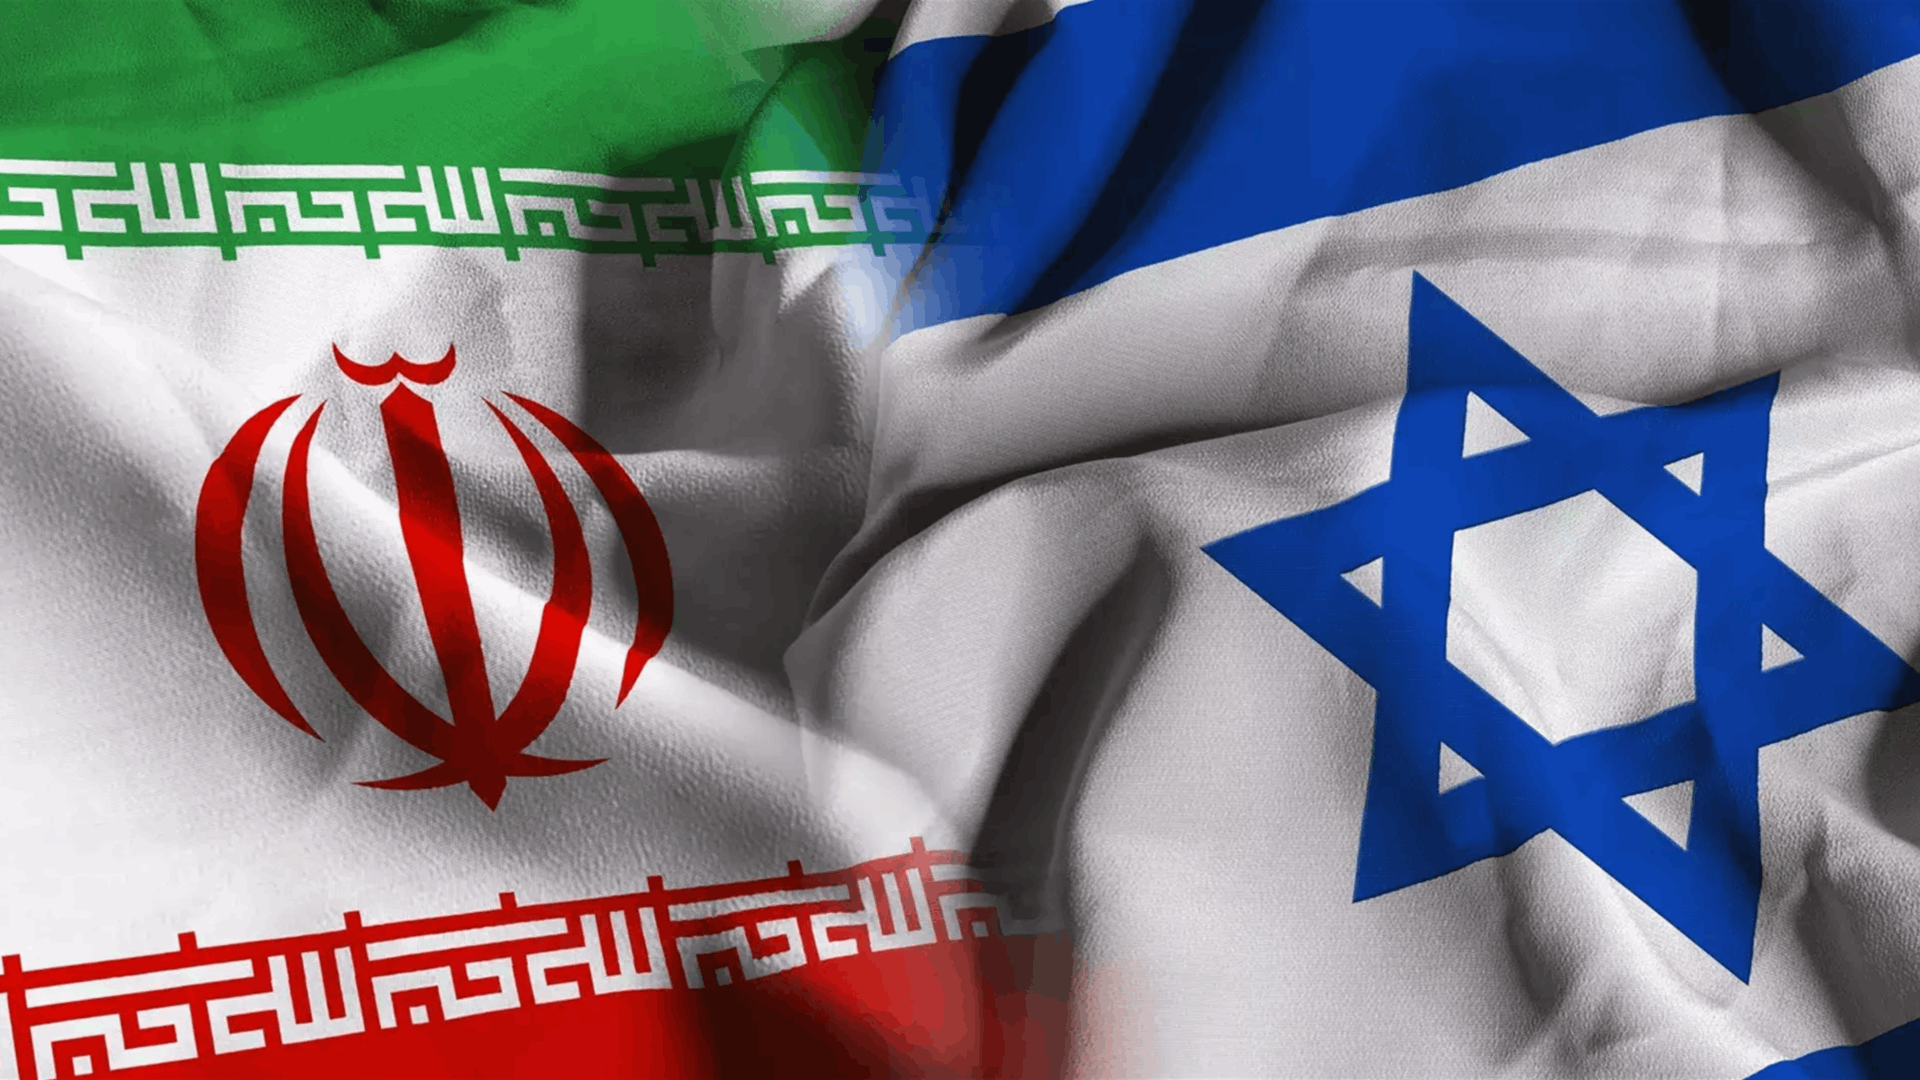 Israel wants to harm Iran with a possible strike on a facility in Tehran or a cyber-attack